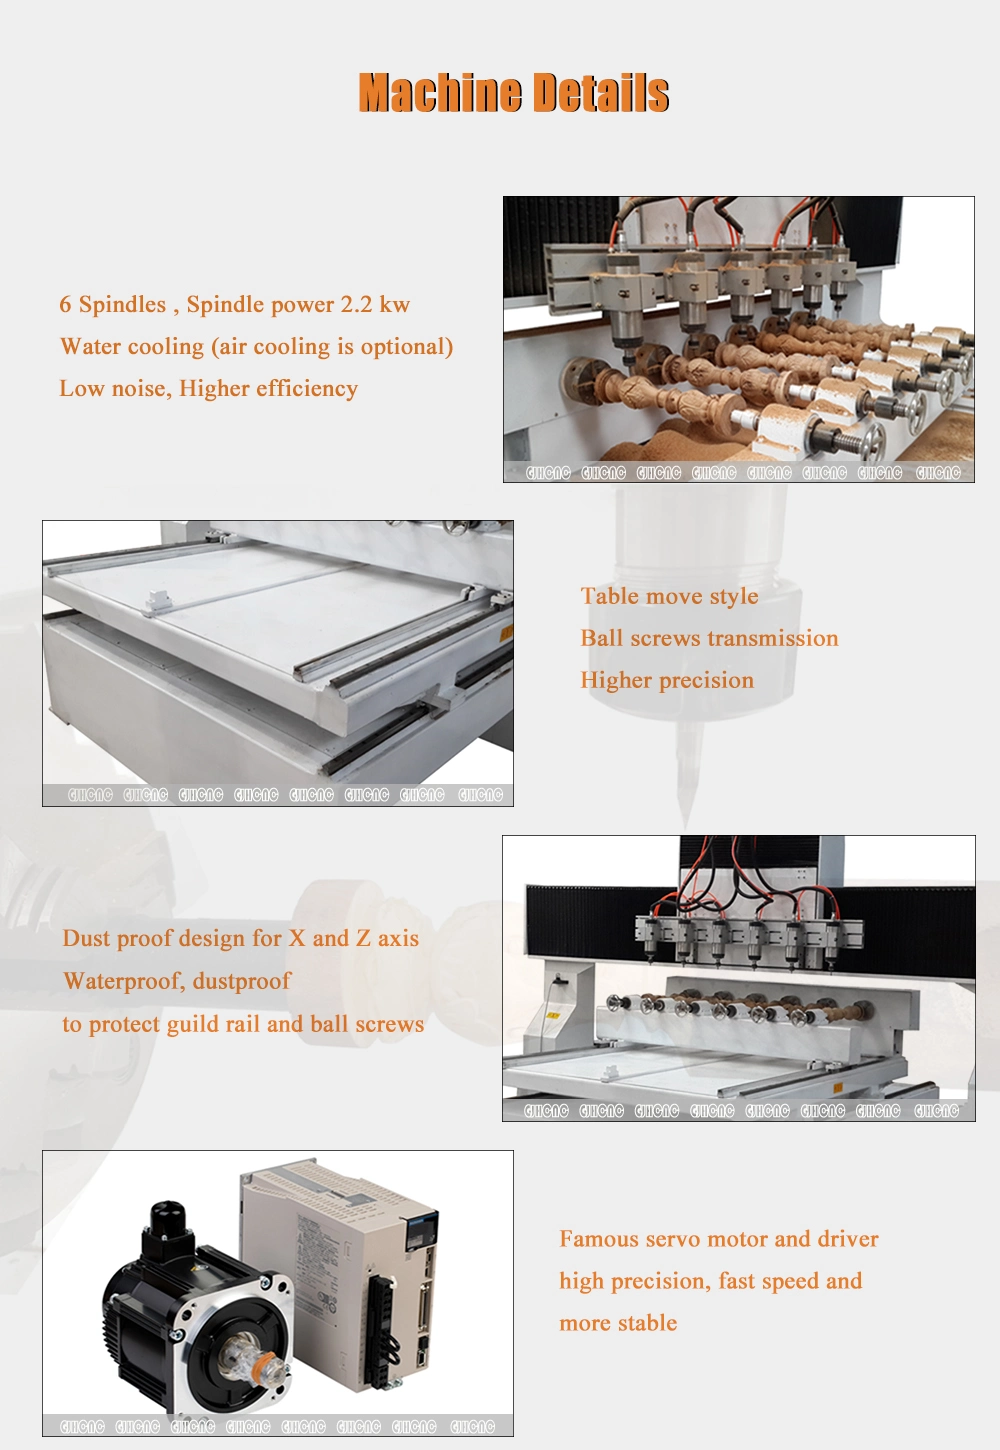 3D, Multi Spindle 4 Axis Wood CNC Router, CNC Engraving Machine, Carving Machine